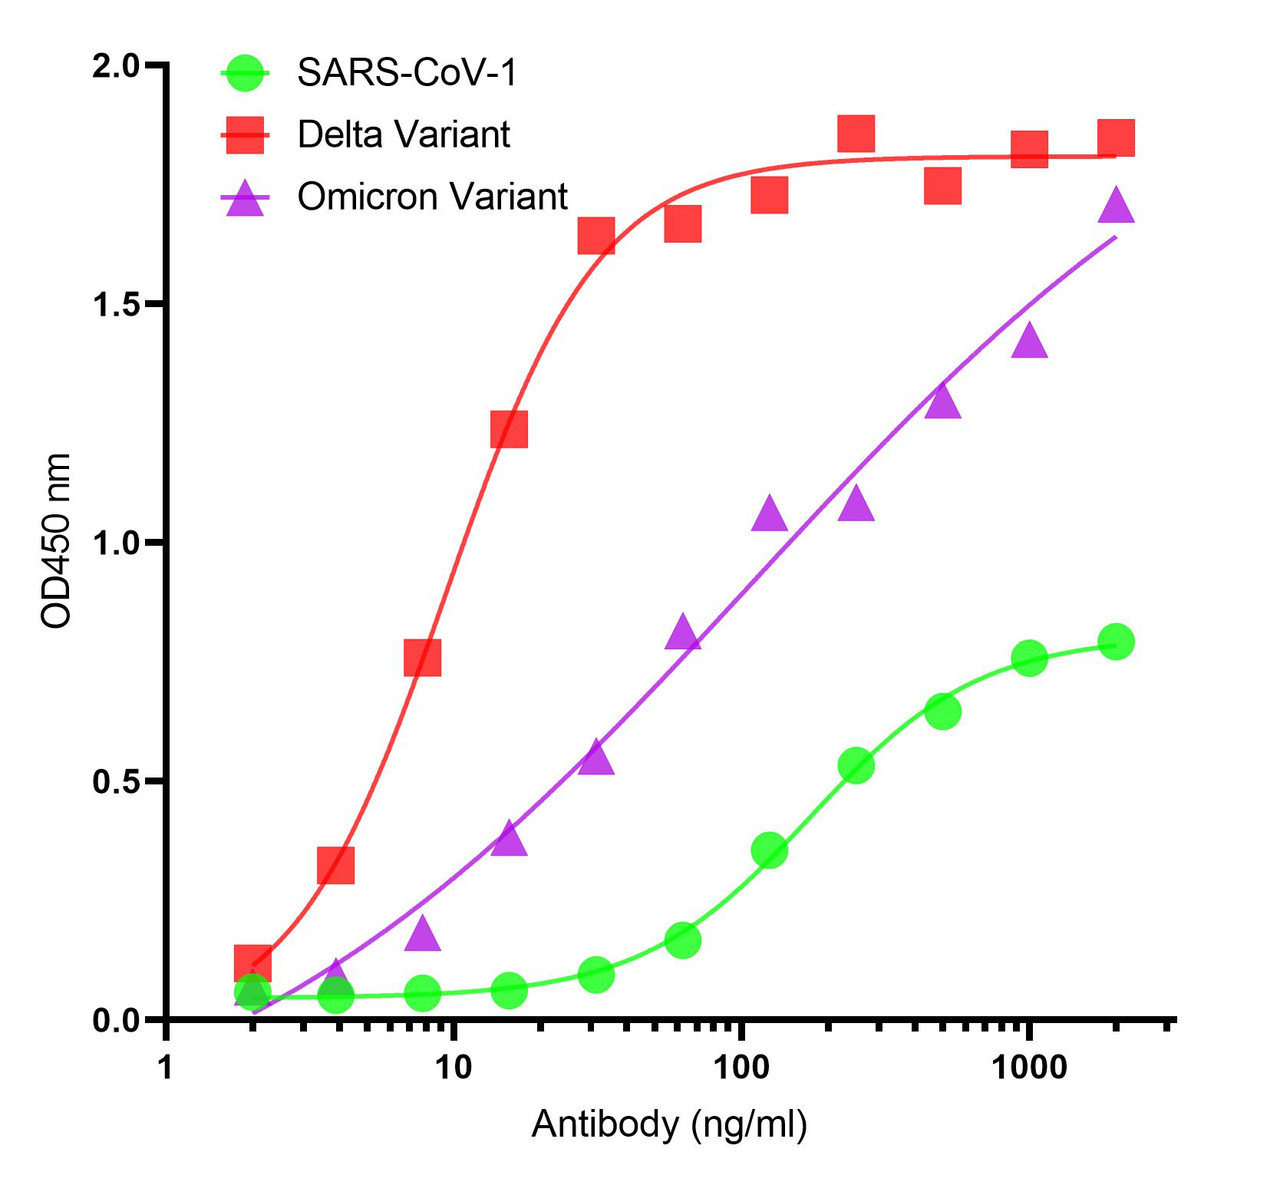 <strong>Figure 1 ELISA Validation with Spike Trimer Proteins of SARS-CoV-2 Variants and SARS-CoV-1 </strong><br>Antibodies: SARS-CoV-2 (COVID-19) Spike S2 Antibody, SD9787. A direct ELISA was performed using Spike trimer protein of SARS-CoV-2 Variants (Delta and Omicron) and SARS-CoV-1 as coating antigens at 1 &#956;g/mL and the anti-SARS-CoV-2 (COVID-19) Spike S2 antibody (SD9787) as the capture antibody, following by anti-cMyc-tag antibody (PM-7669) at 1 &#956;g/mL. Secondary: Goat anti-mouse IgG HRP conjugate at 1:5000 dilution. Detection range is from 16 ng/mL to 2000 ng/mL.